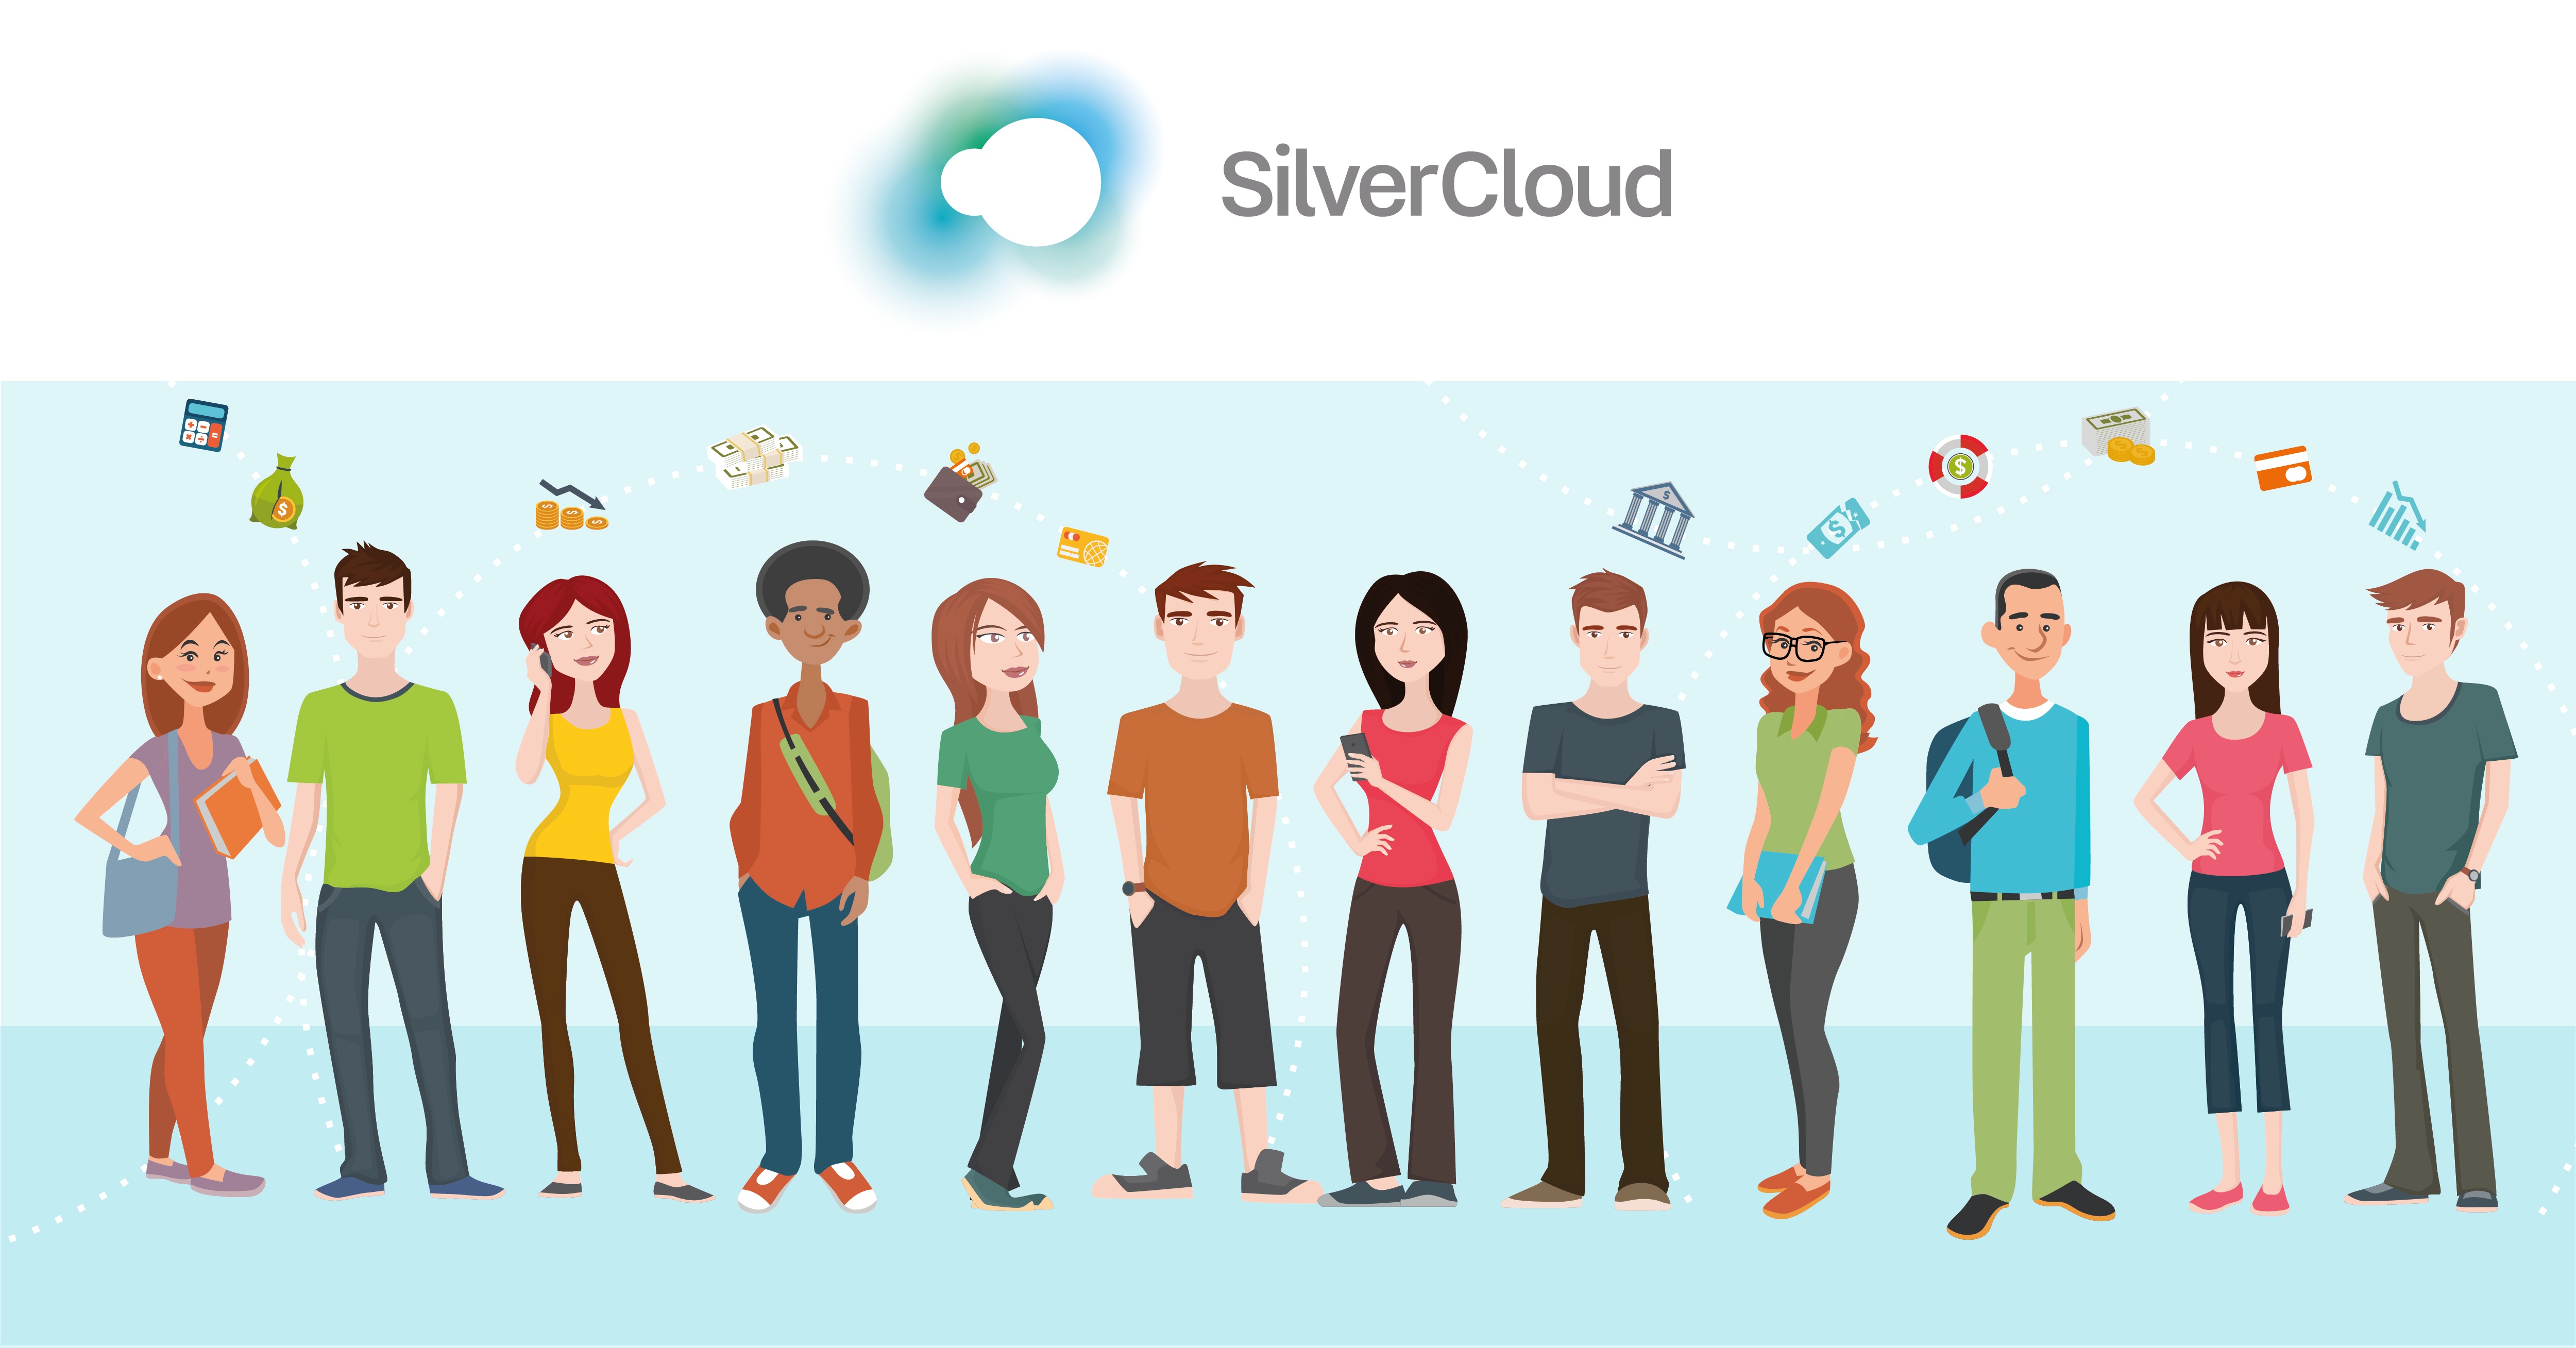 A group of 12 diverse people, standing in a line. There are symbols for money and the Silver Cloud logo above their heads.